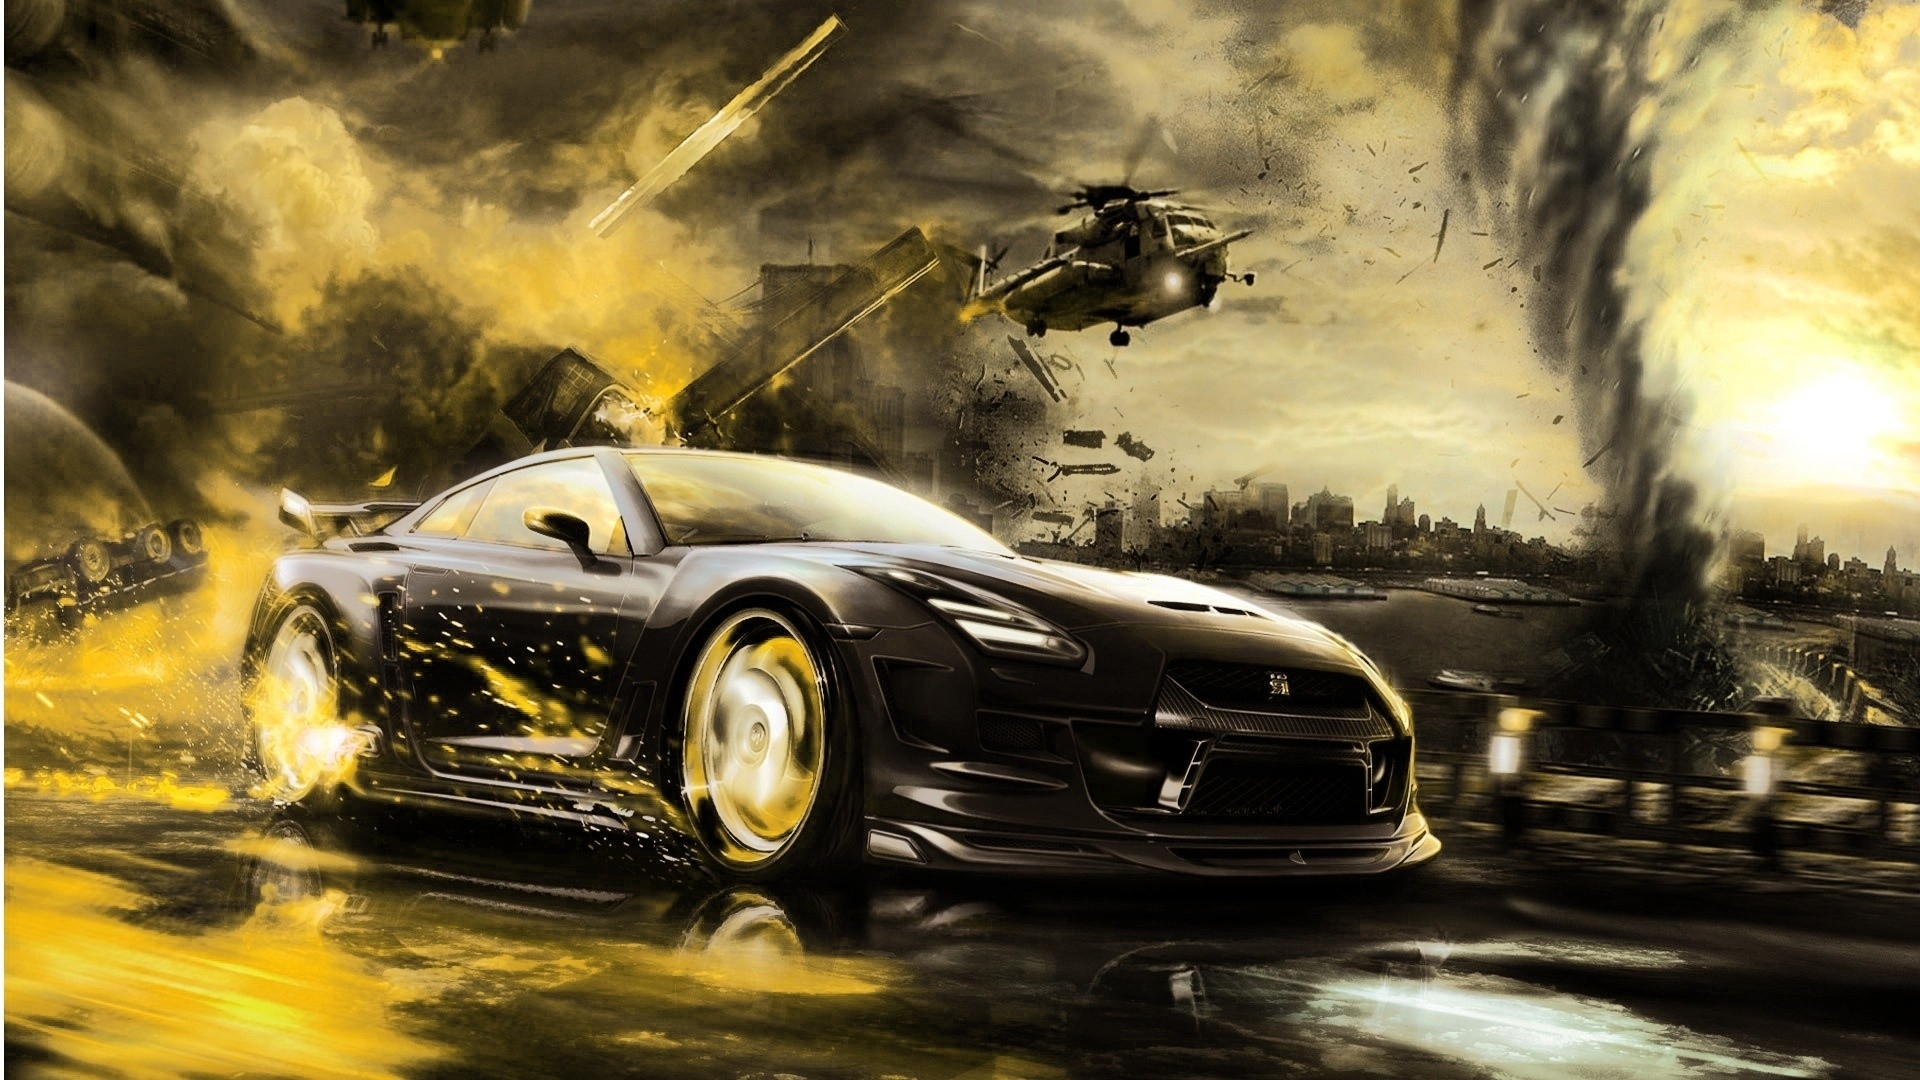 10 Latest Cool Car Backgrounds Hd 1080P FULL HD 1920×1080 For PC Background